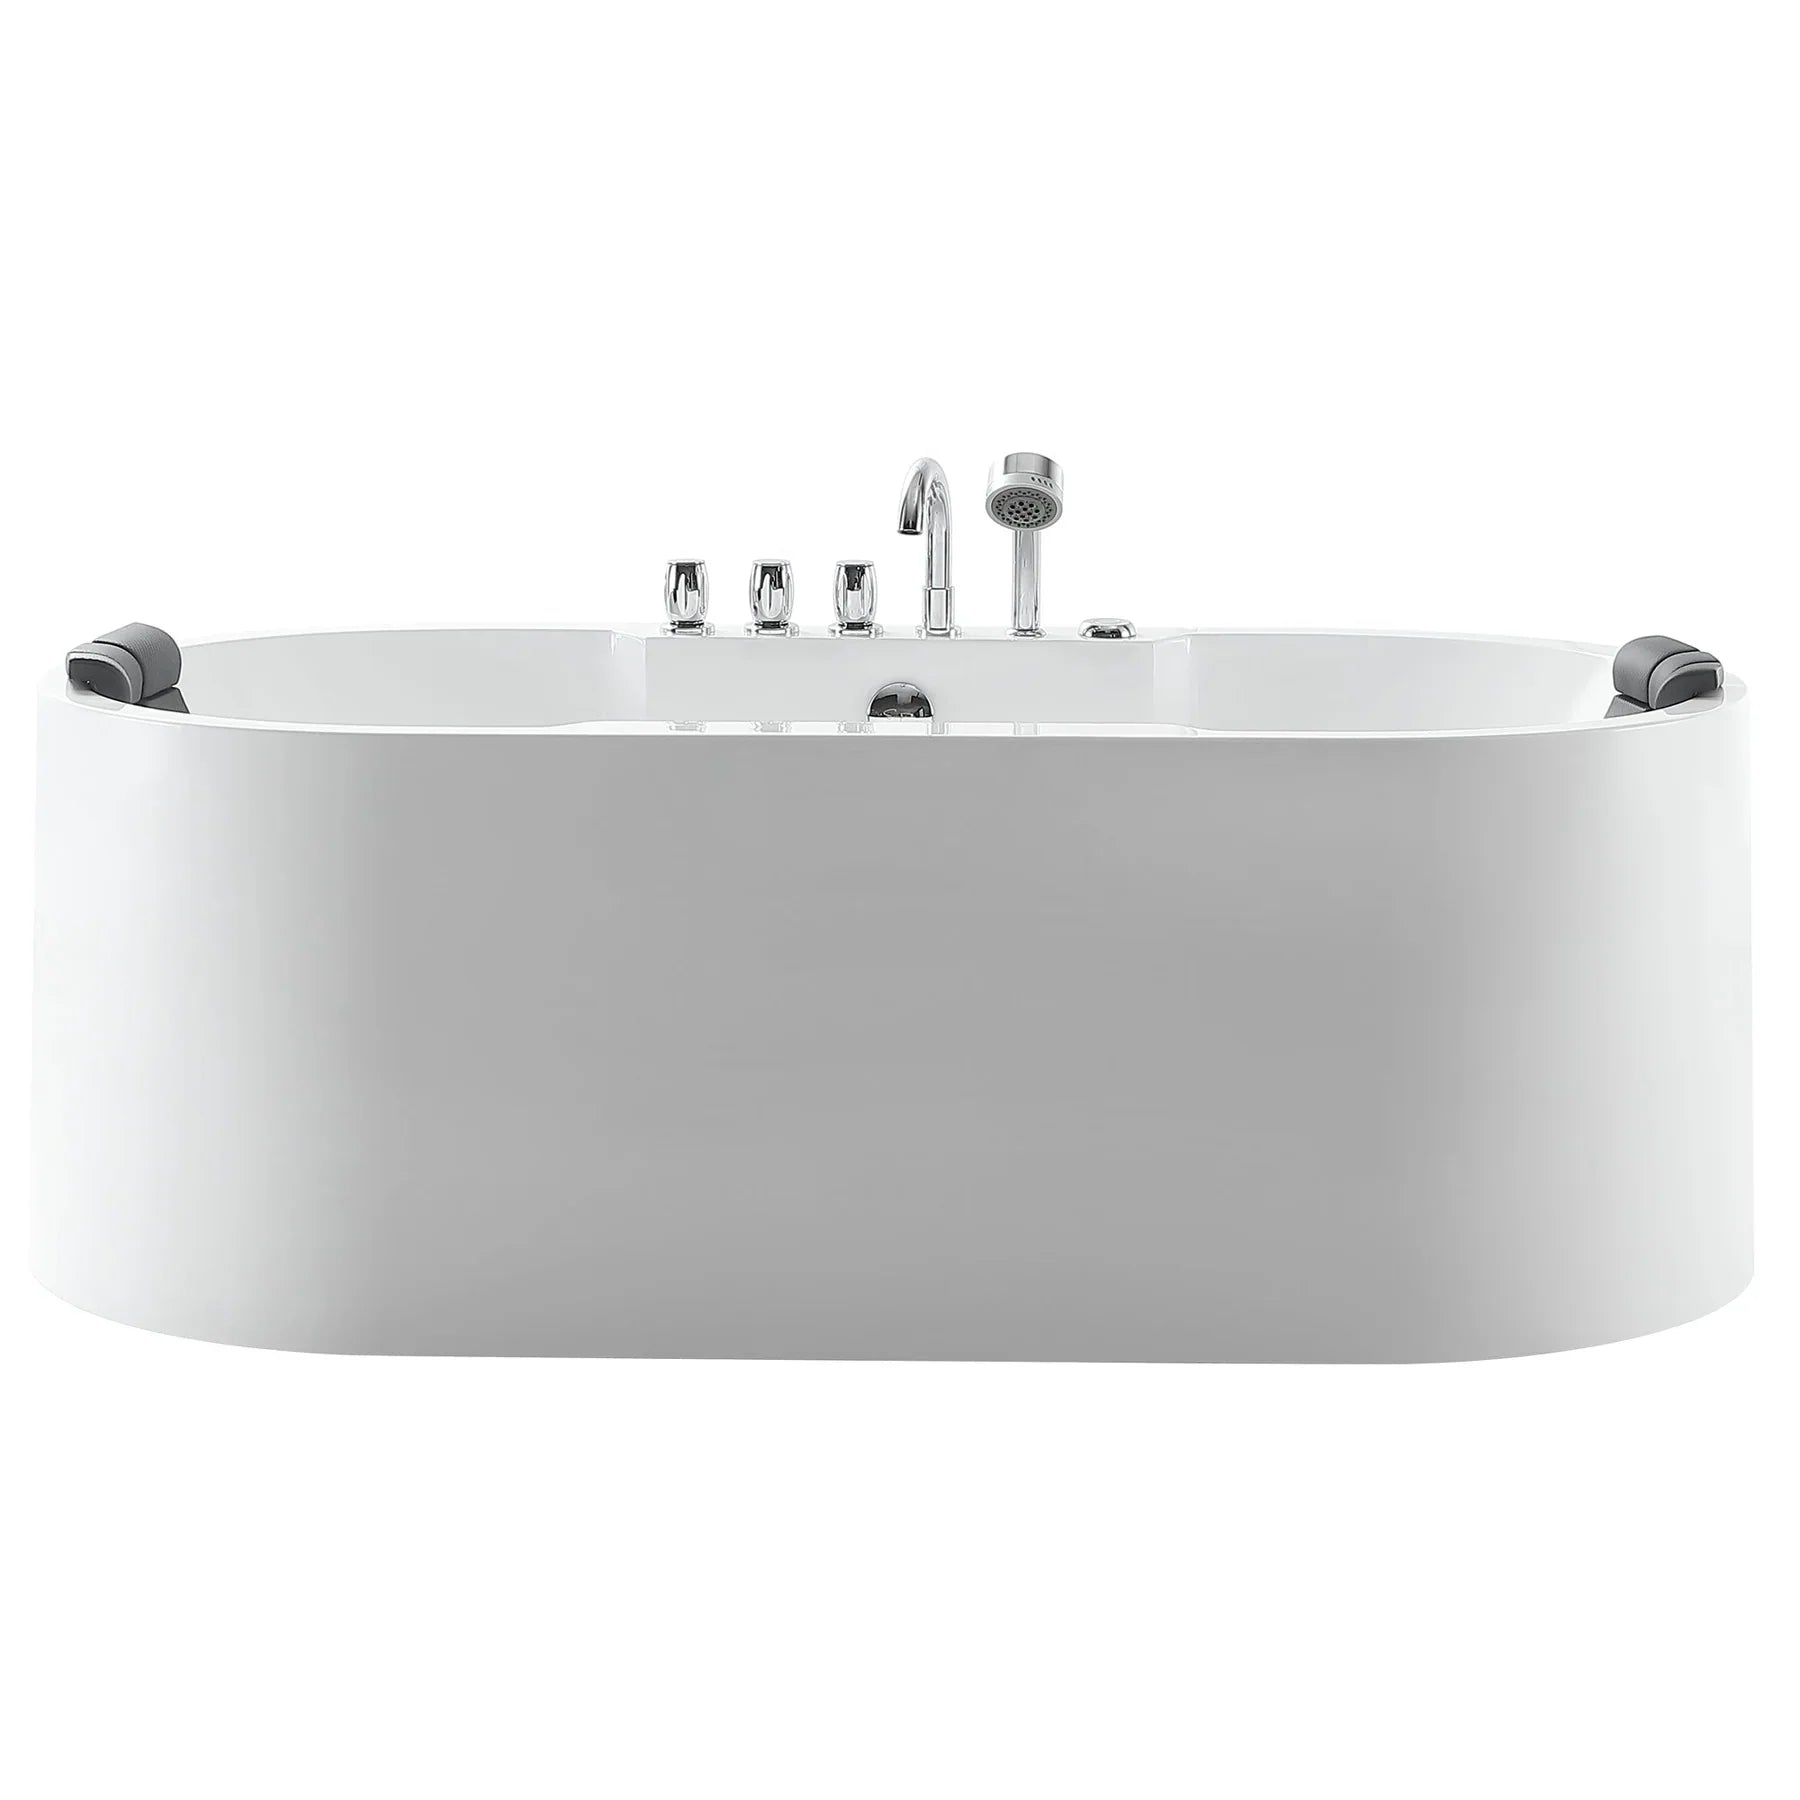 Empava 67 in. Freestanding Jetted Bathtub in White Acrylic (67AIS17)